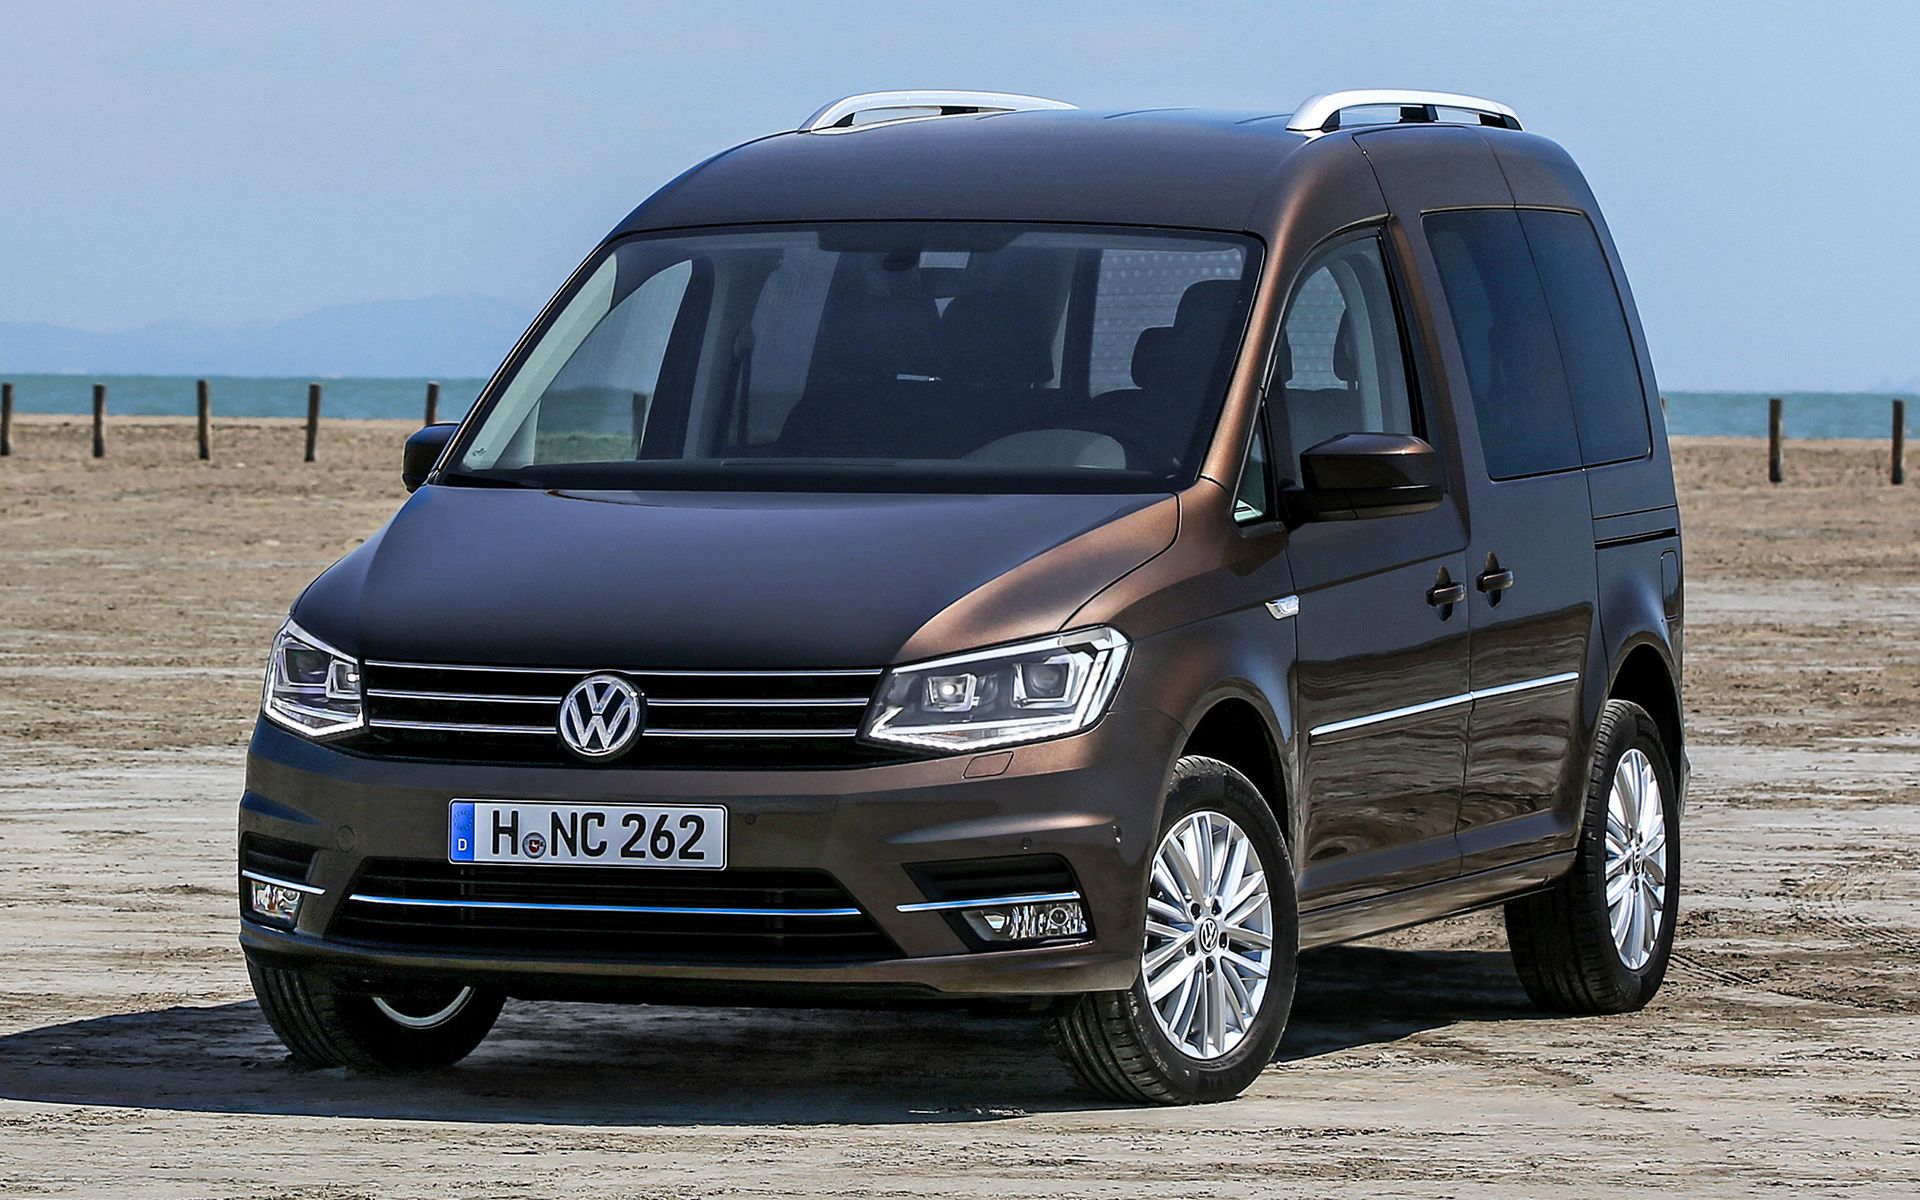 Volkswagen Caddy and HD Image